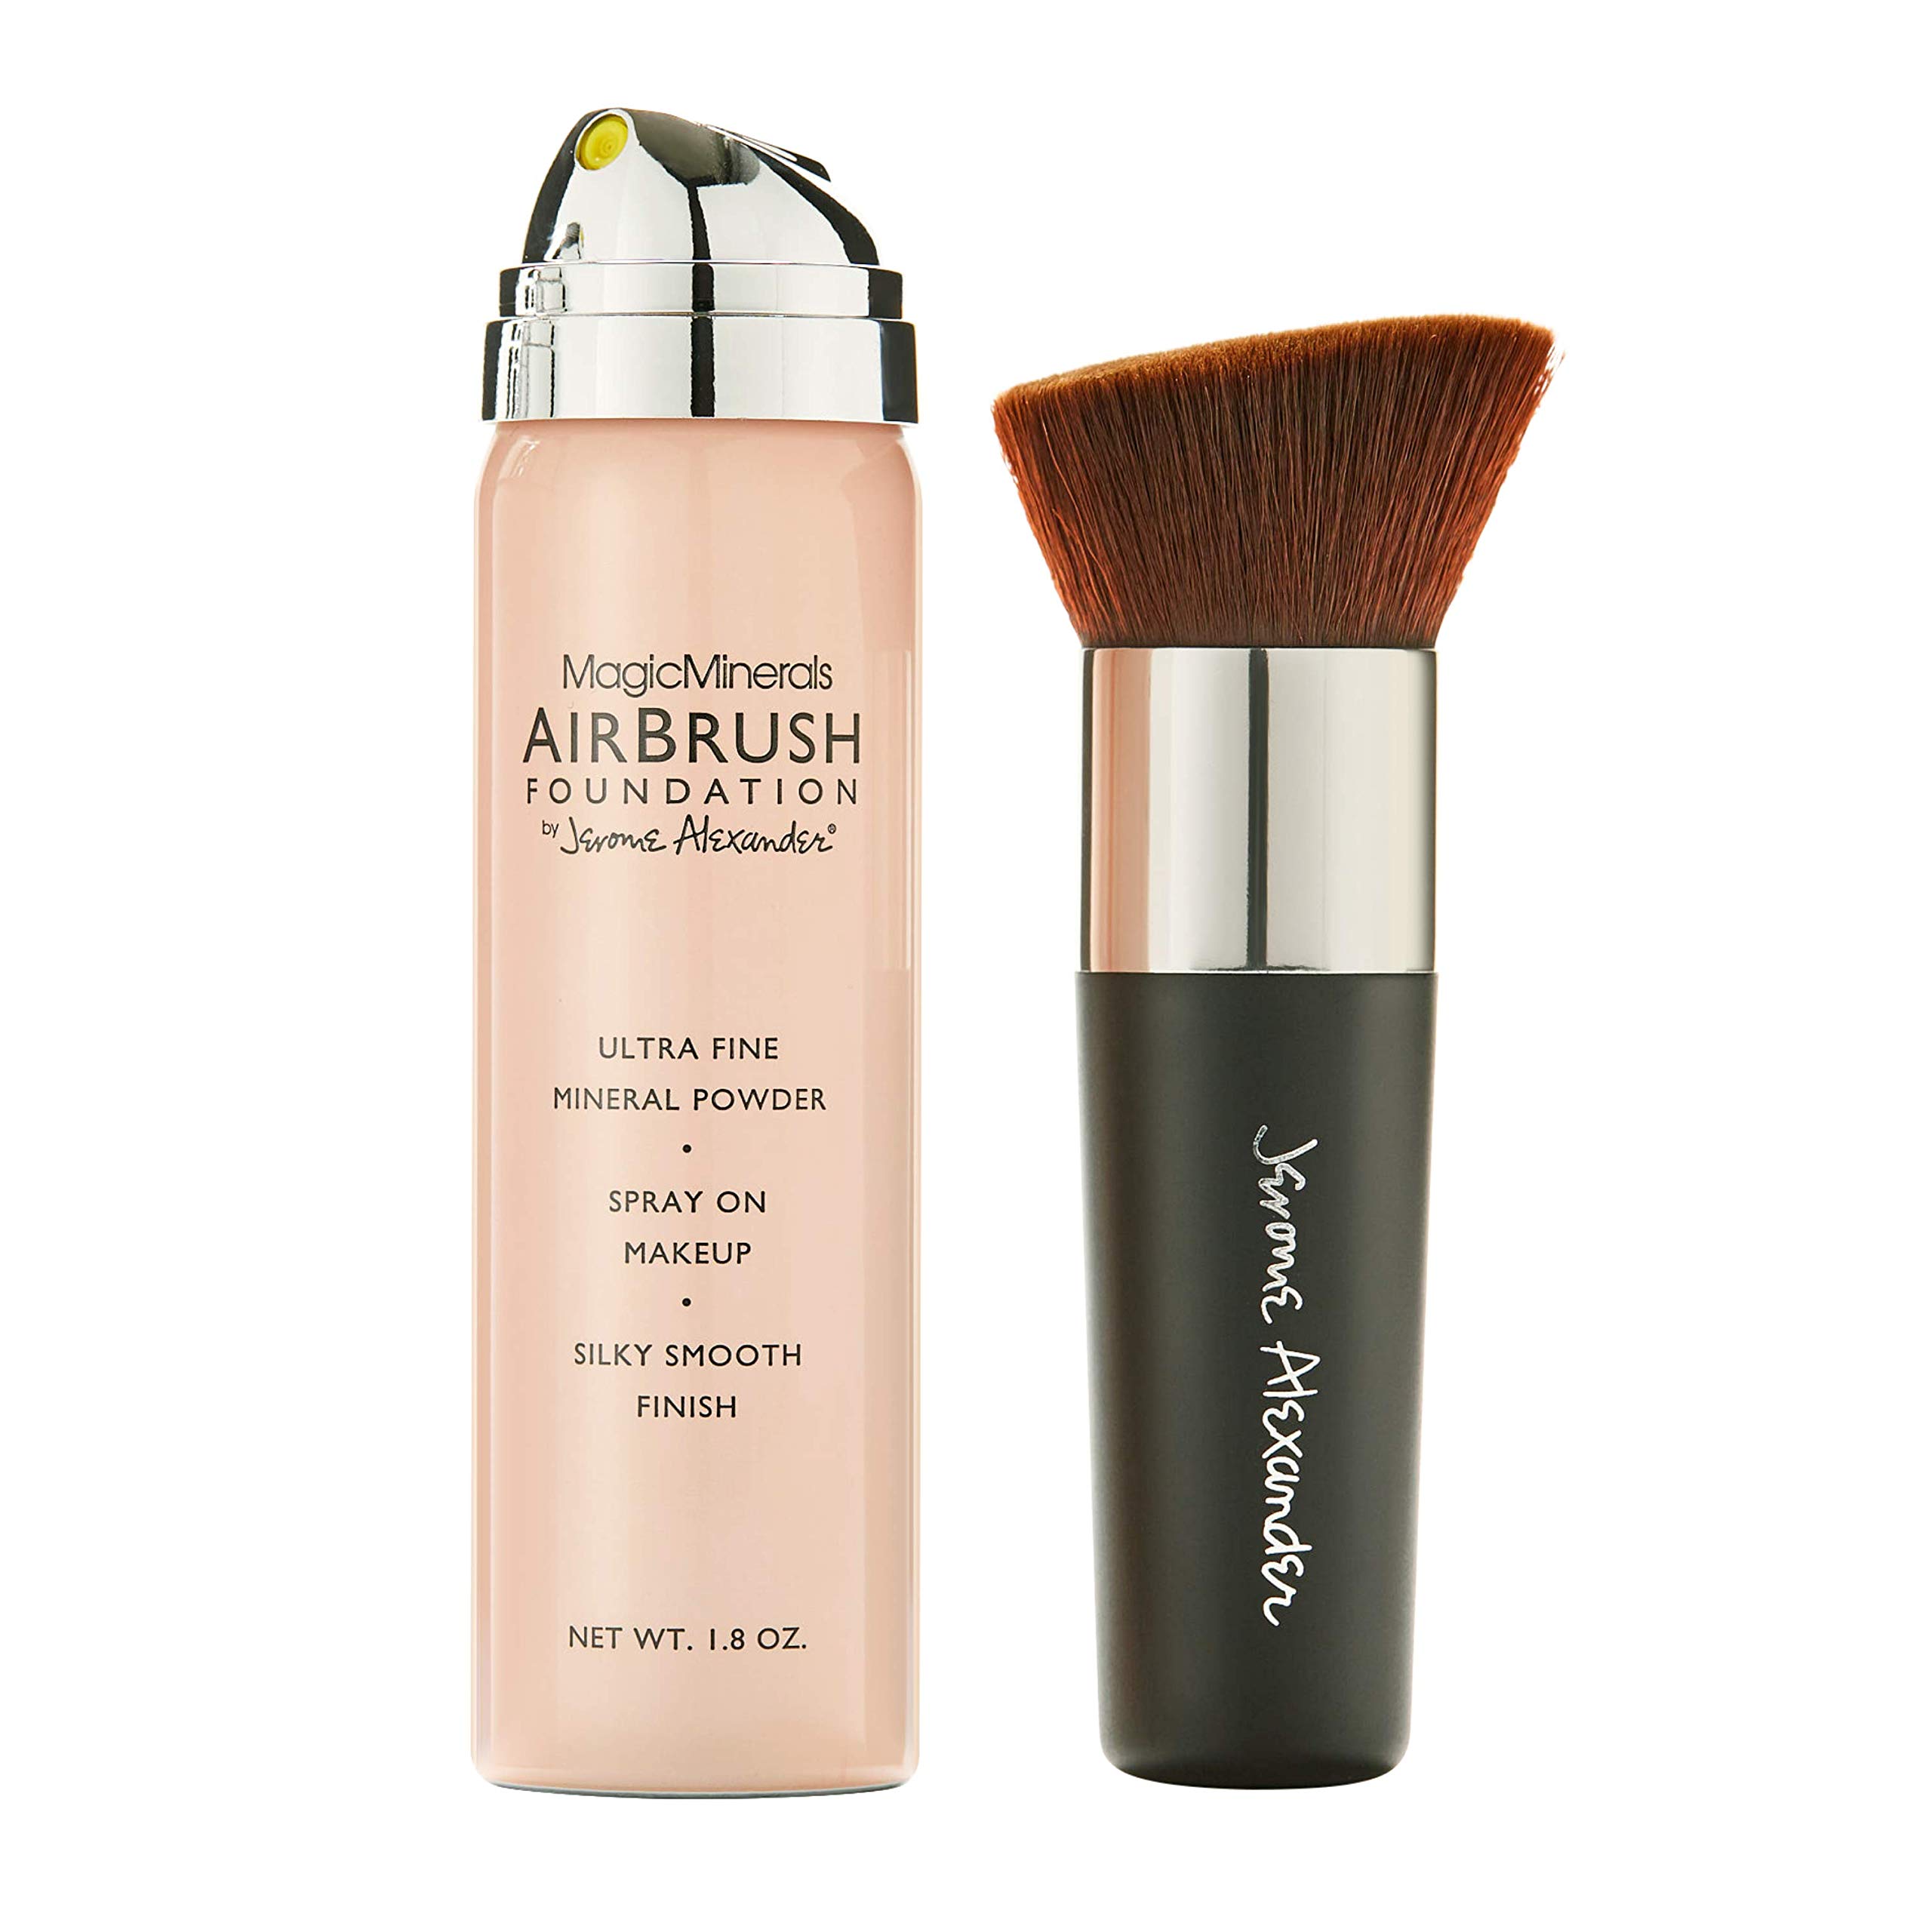 MagicMinerals AirBrush Foundation by Jerome Alexander 2pc Set with